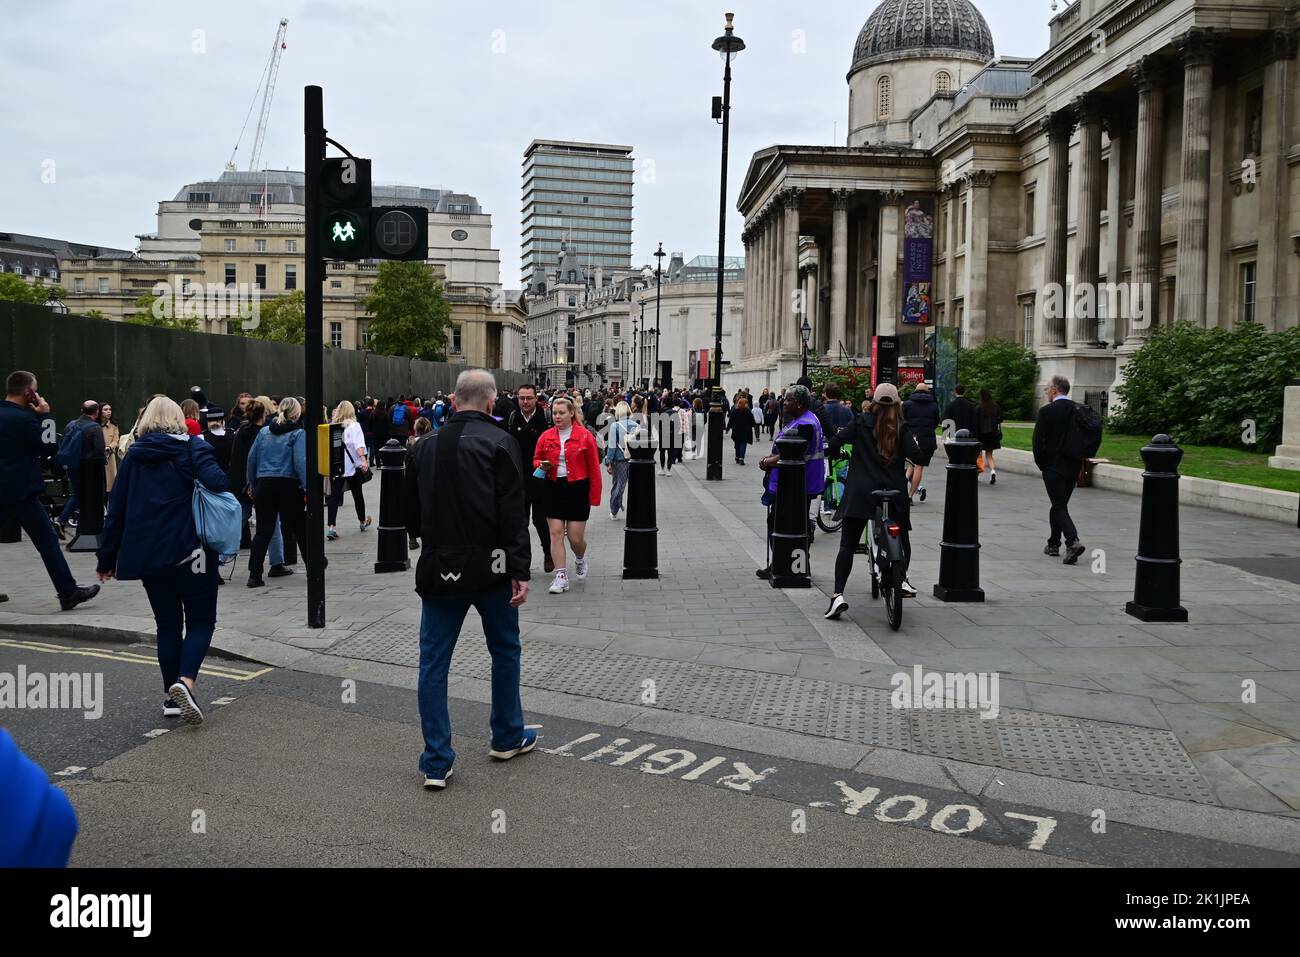 State funeral of Her Majesty Queen Elizabeth II, London, UK, Monday 19th September 2022. Crowds of mourners en-route passing the National Gallery on closed Trafalgar Square. Stock Photo